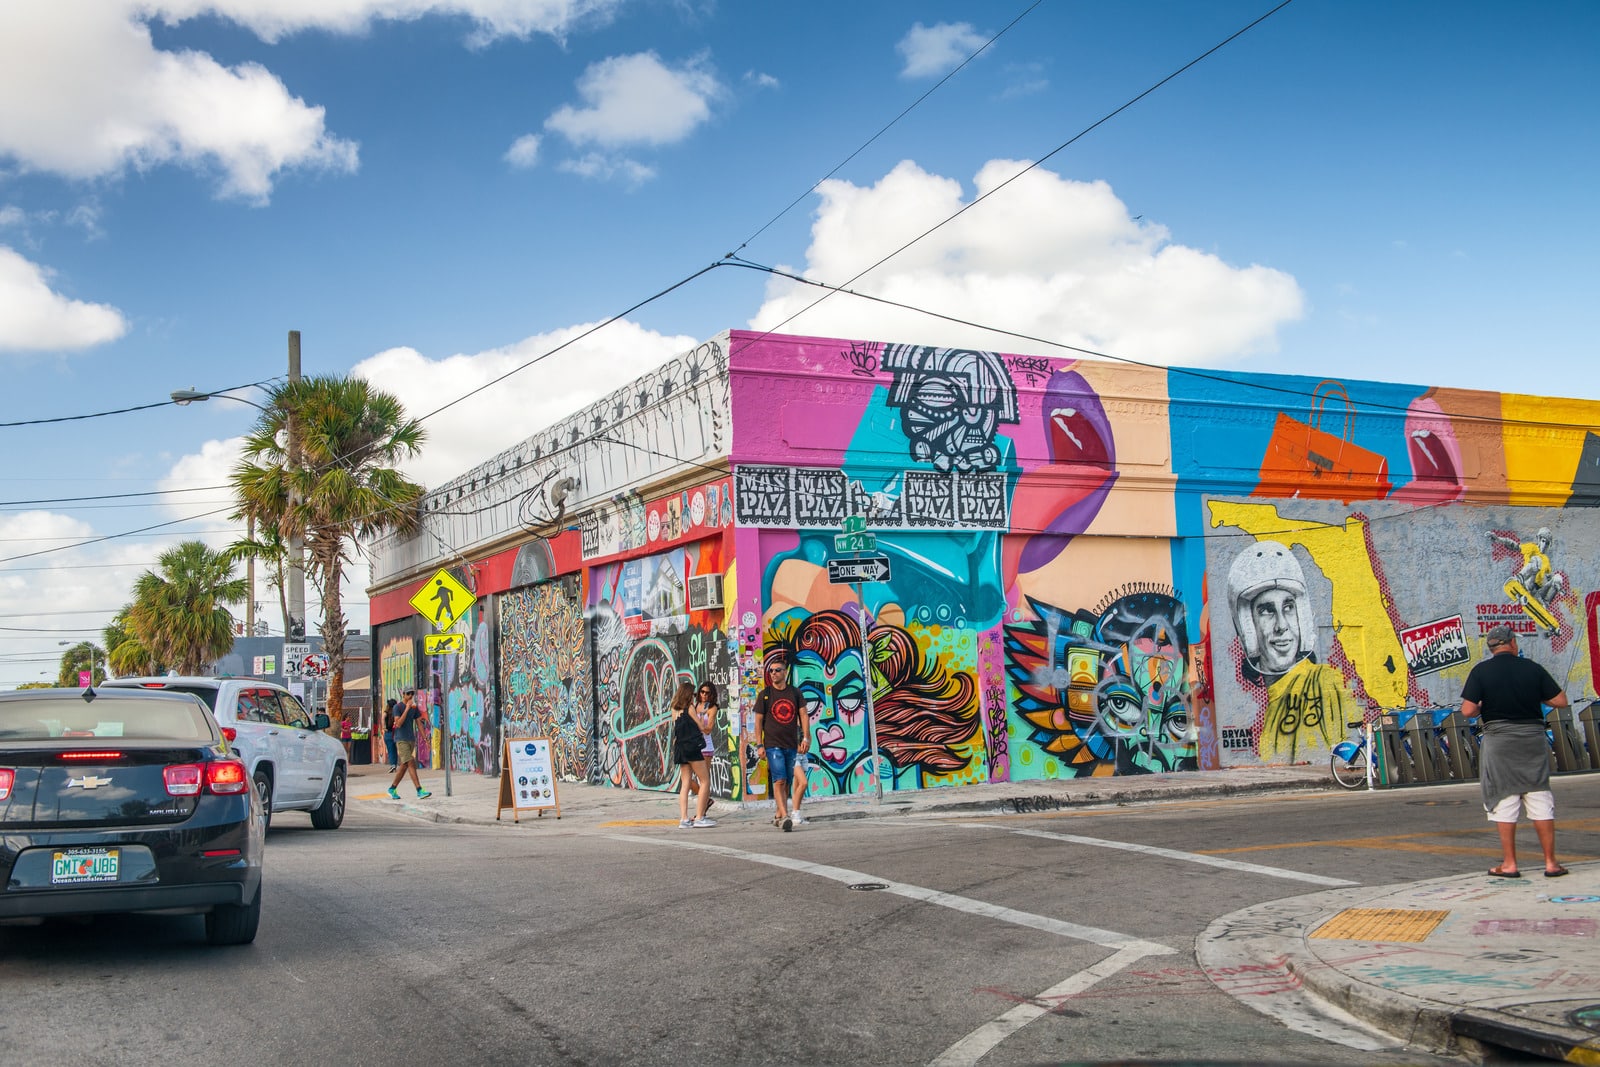 Wynwood building with colorful murals